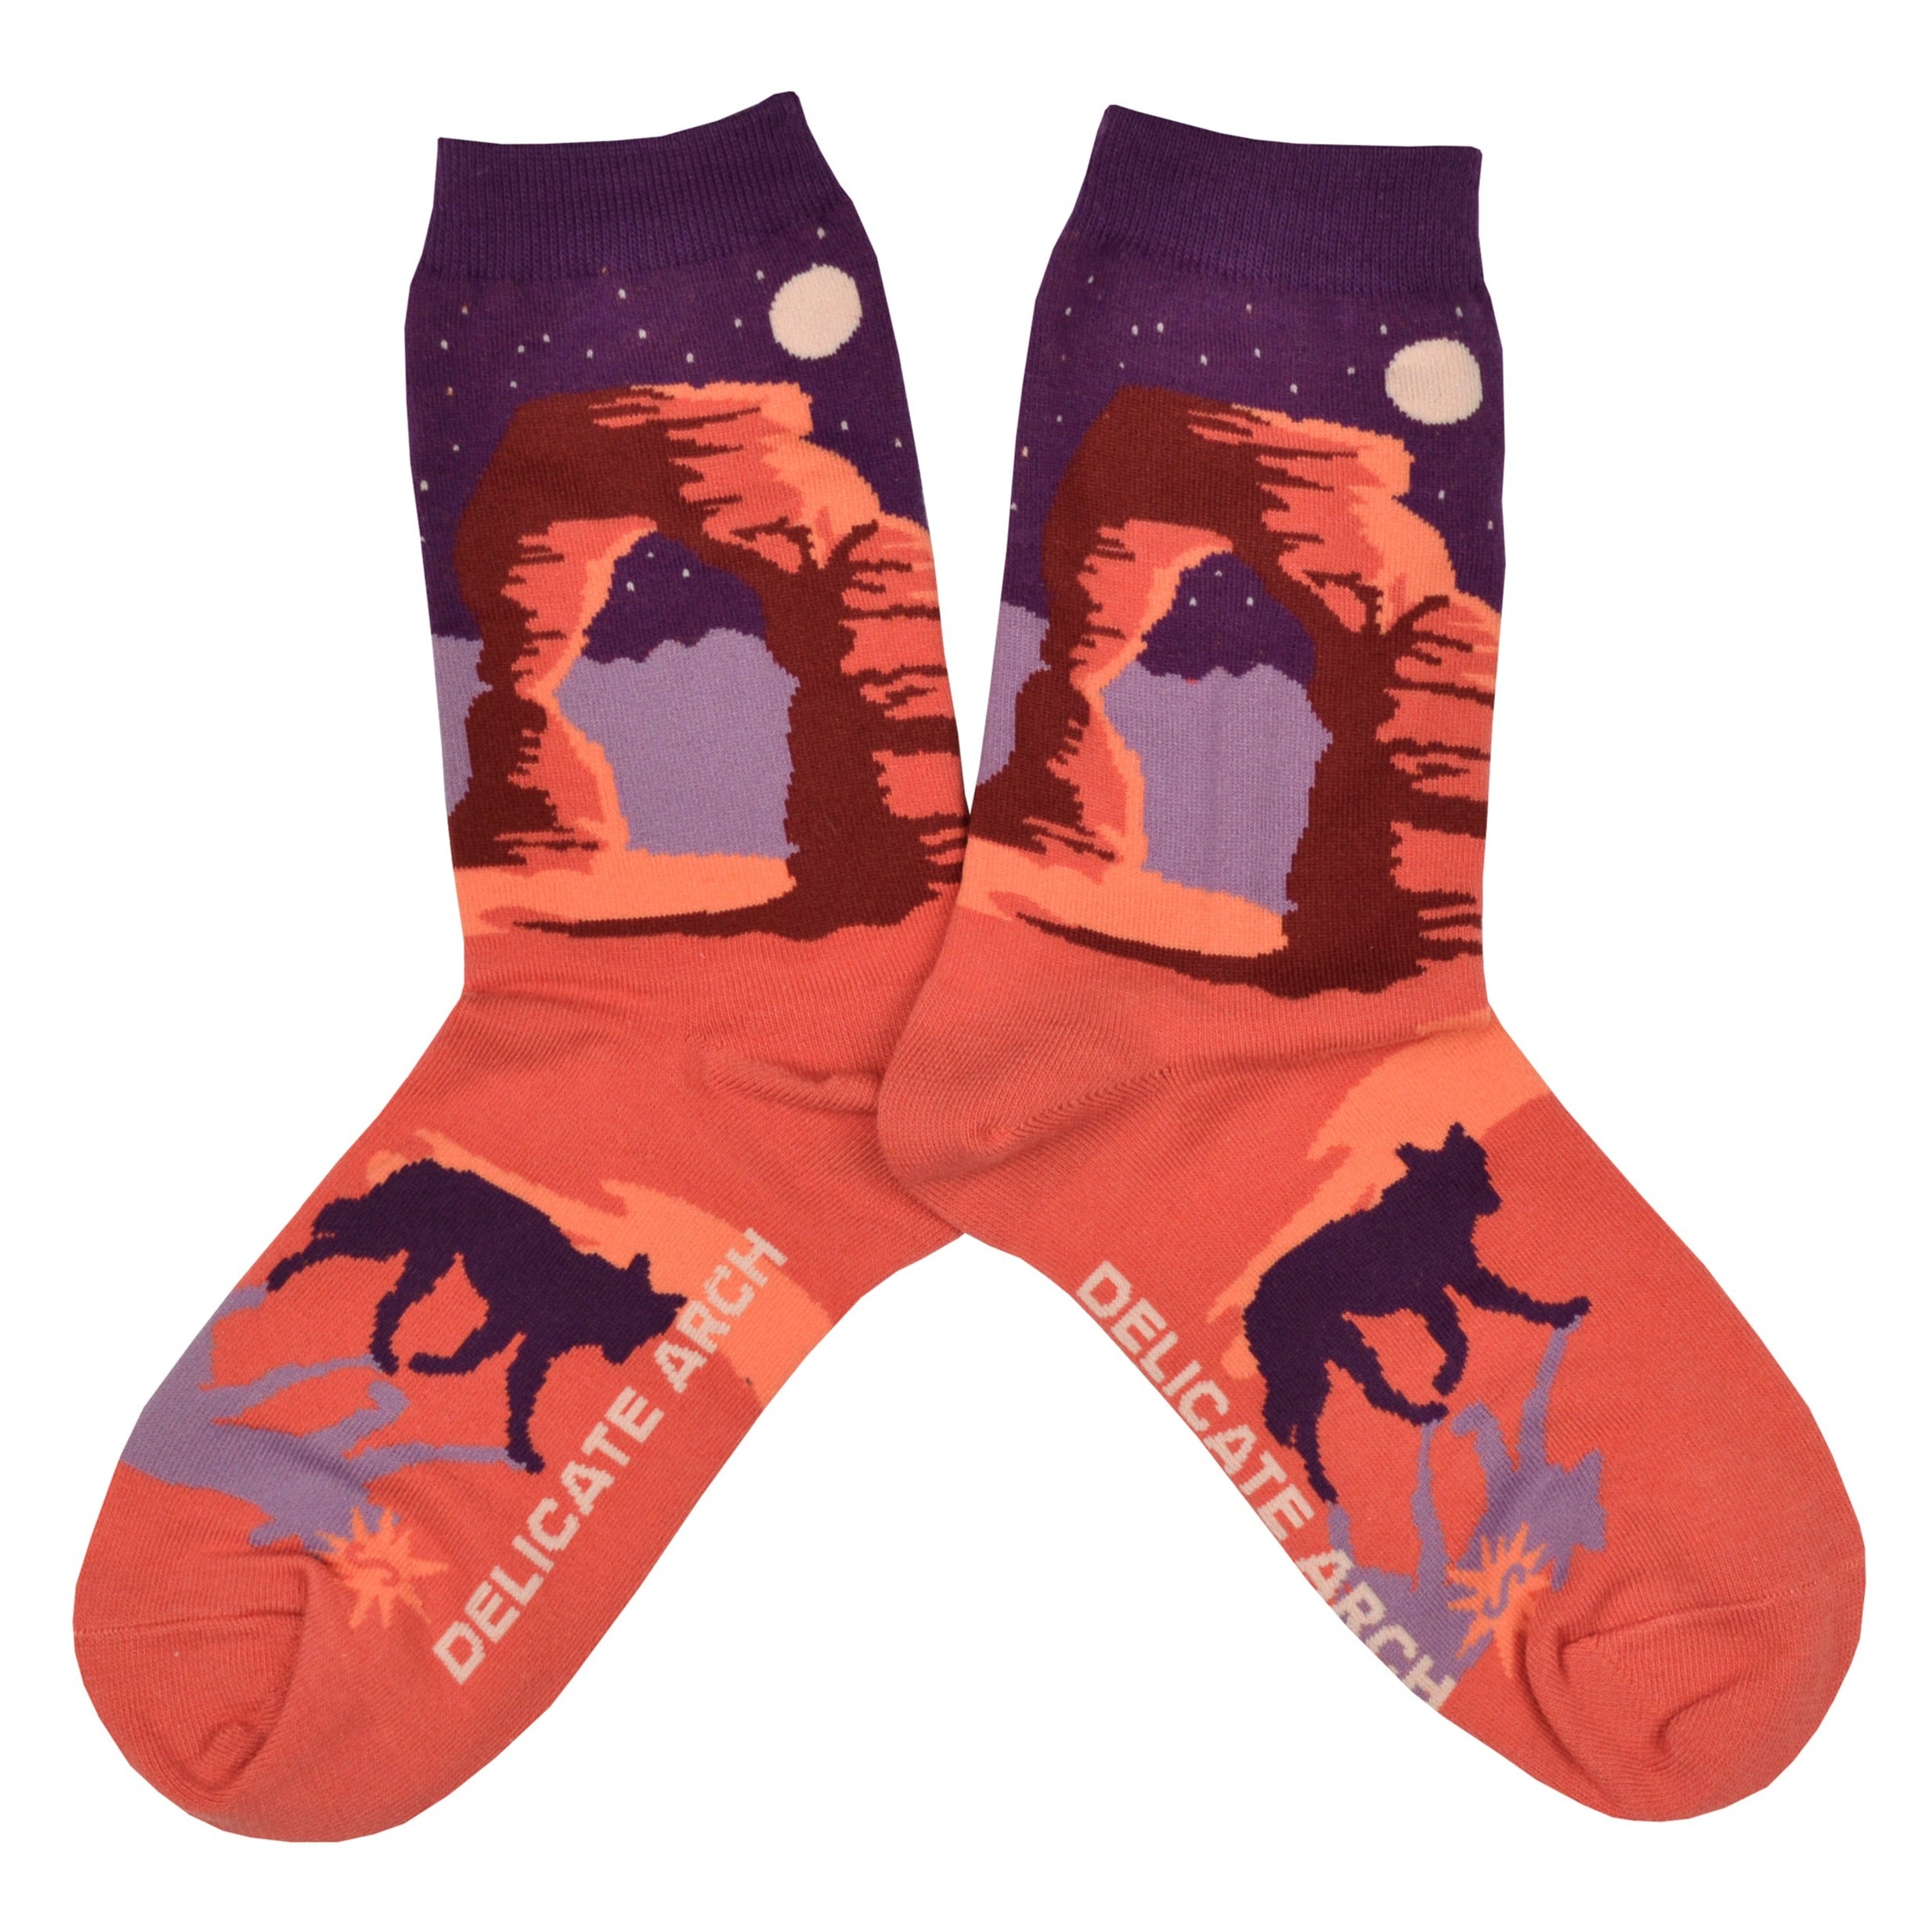 Shown in a flatlay, a pair of Sock It to Me brand women's cotton crew socks with an orange heel/toe an a purple cuff. These socks feature an arch from Arches National Park on the leg and a coyote on the foot of the sock as well as the words 